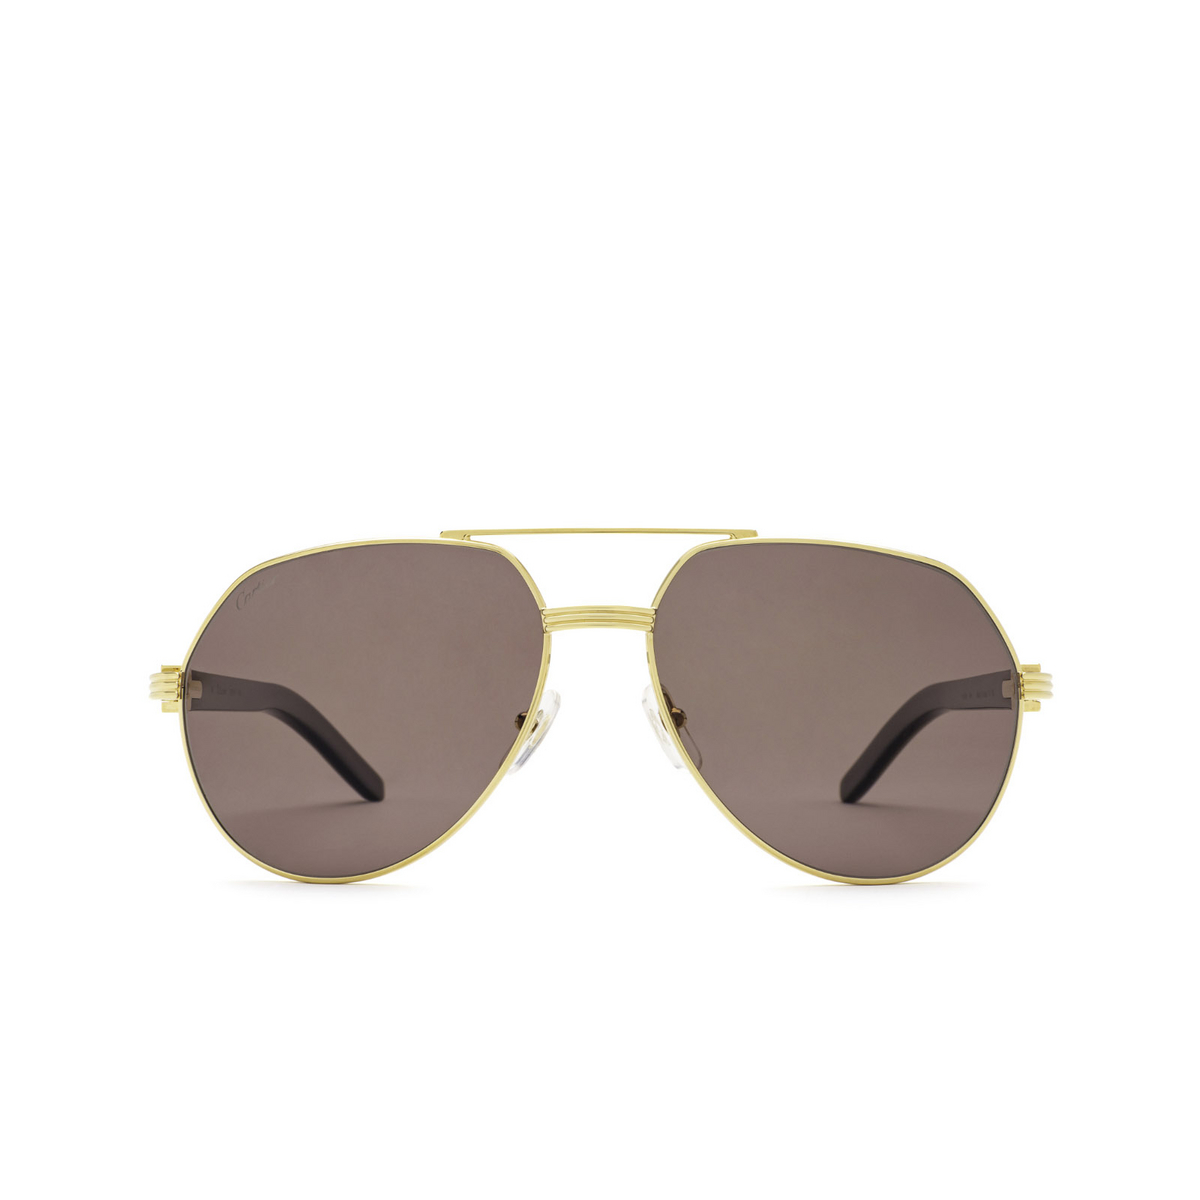 Cartier® Irregular Sunglasses: CT0272S color Gold & White 003 - front view.